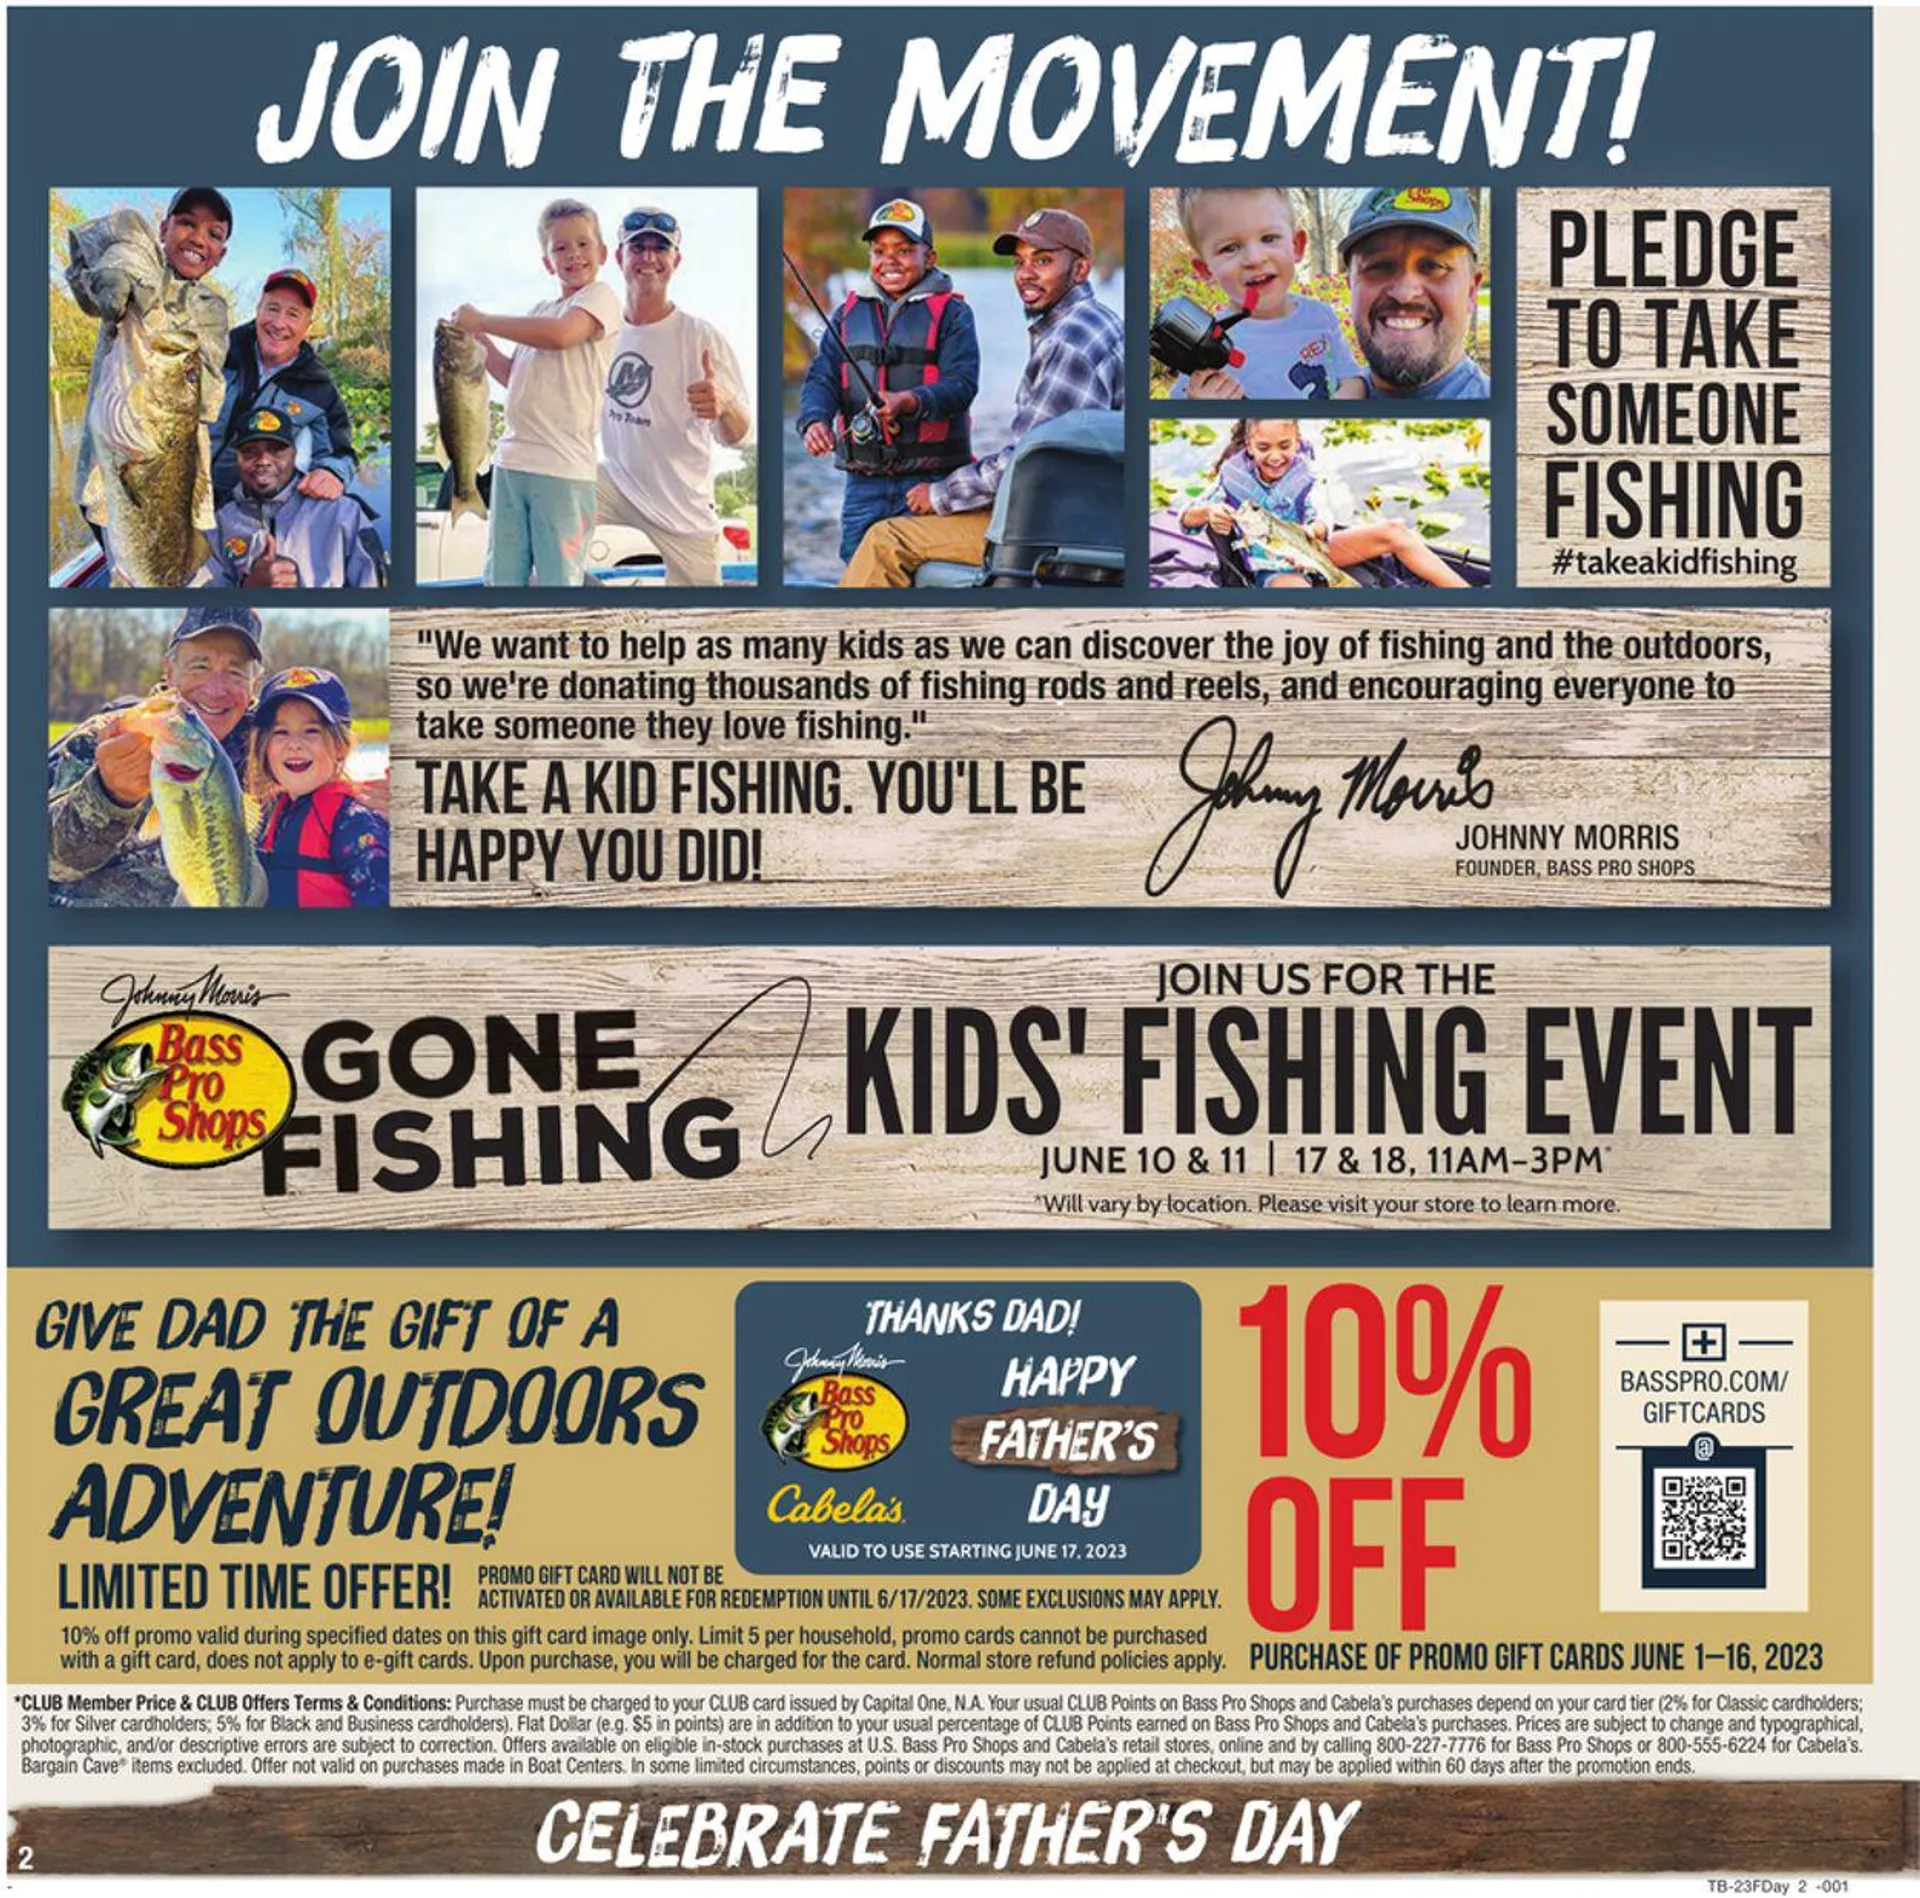 Cabelas Current weekly ad - 2